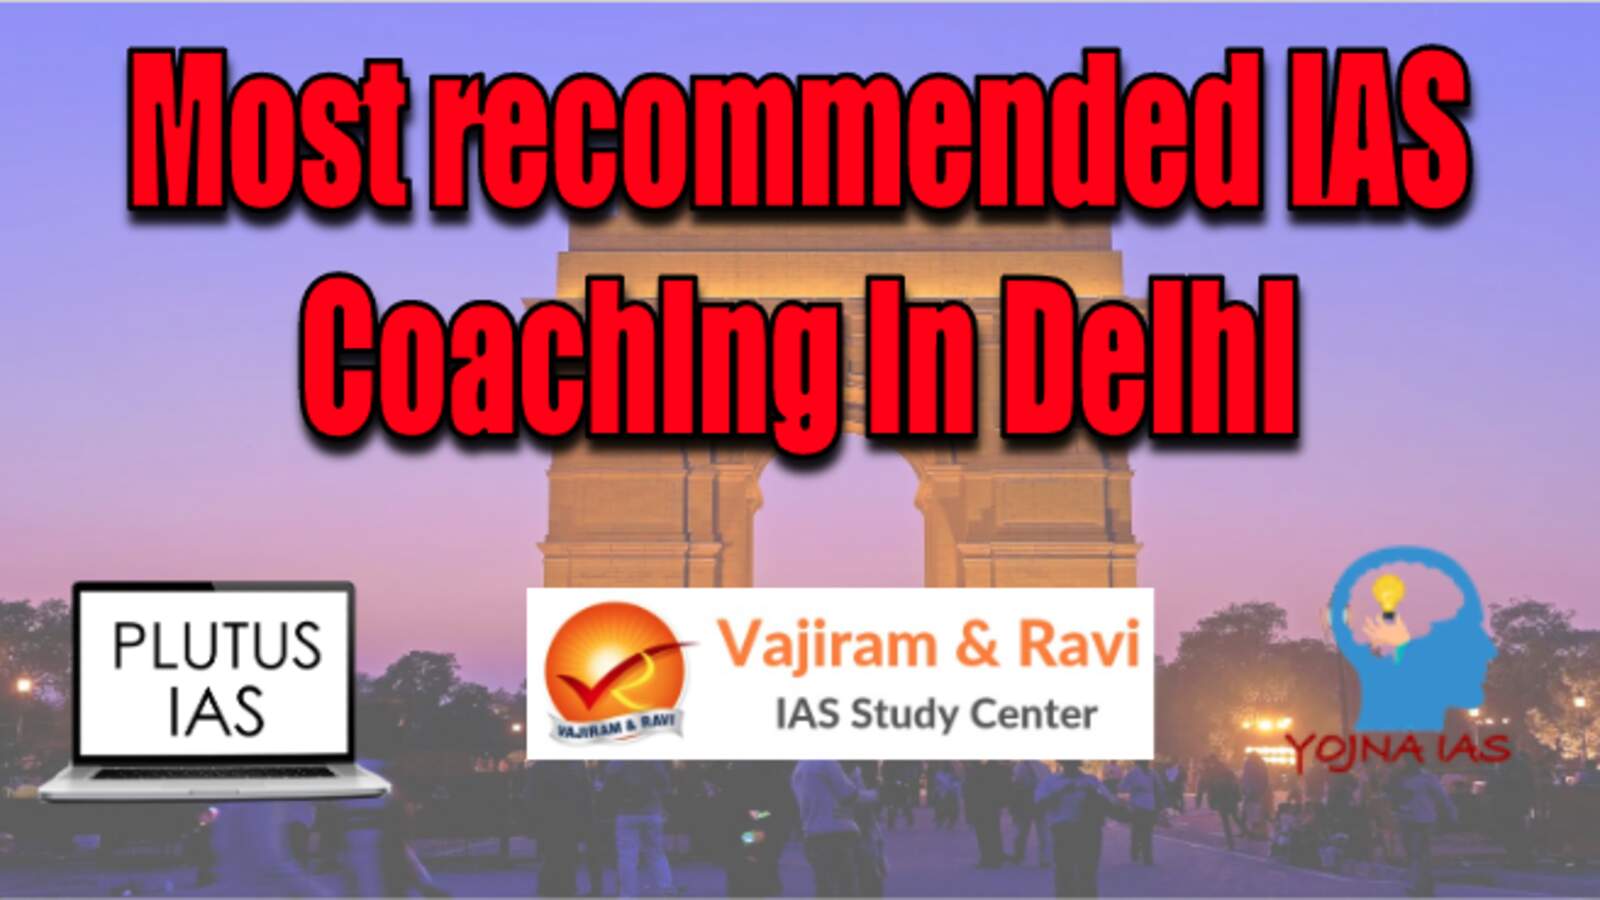 Most recommended IAS Coaching in Delhi